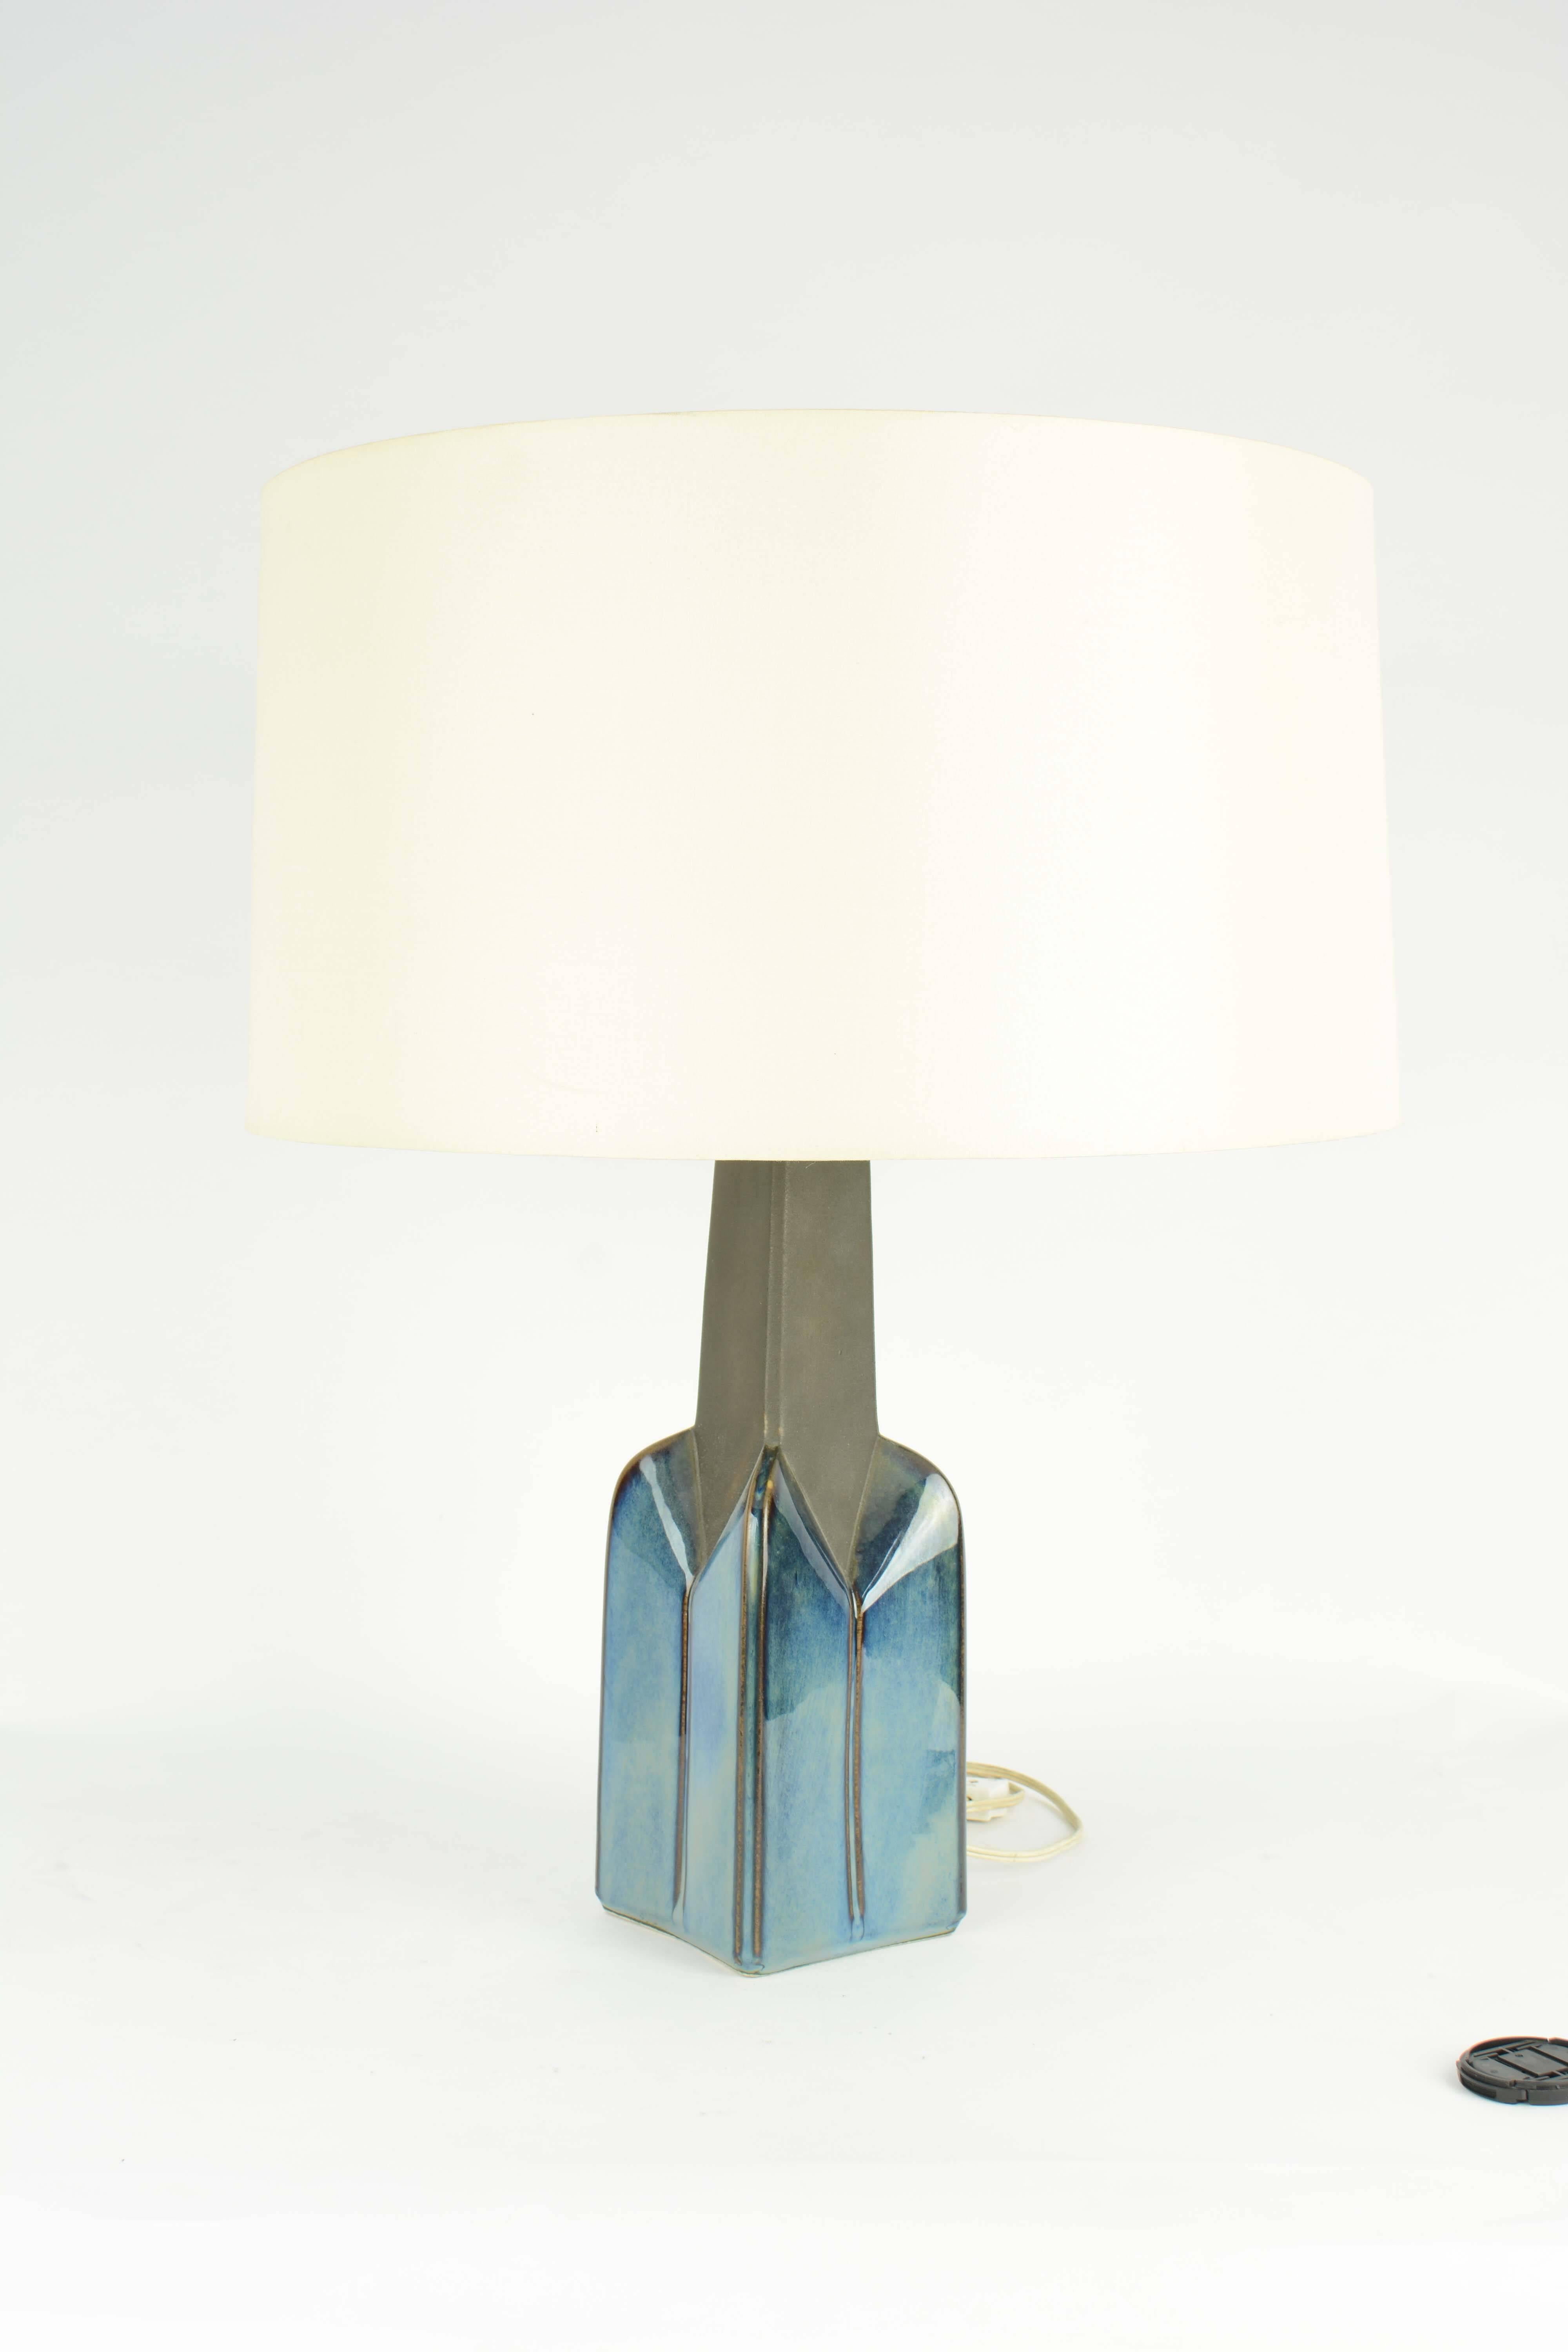 These beauties are hand glazed from Soholm factory in 1960s. They are both impressive and elegant in their presence and form. The lamps are sold without shades and can to rewired for an addition cost. Please look at the all the photos because the